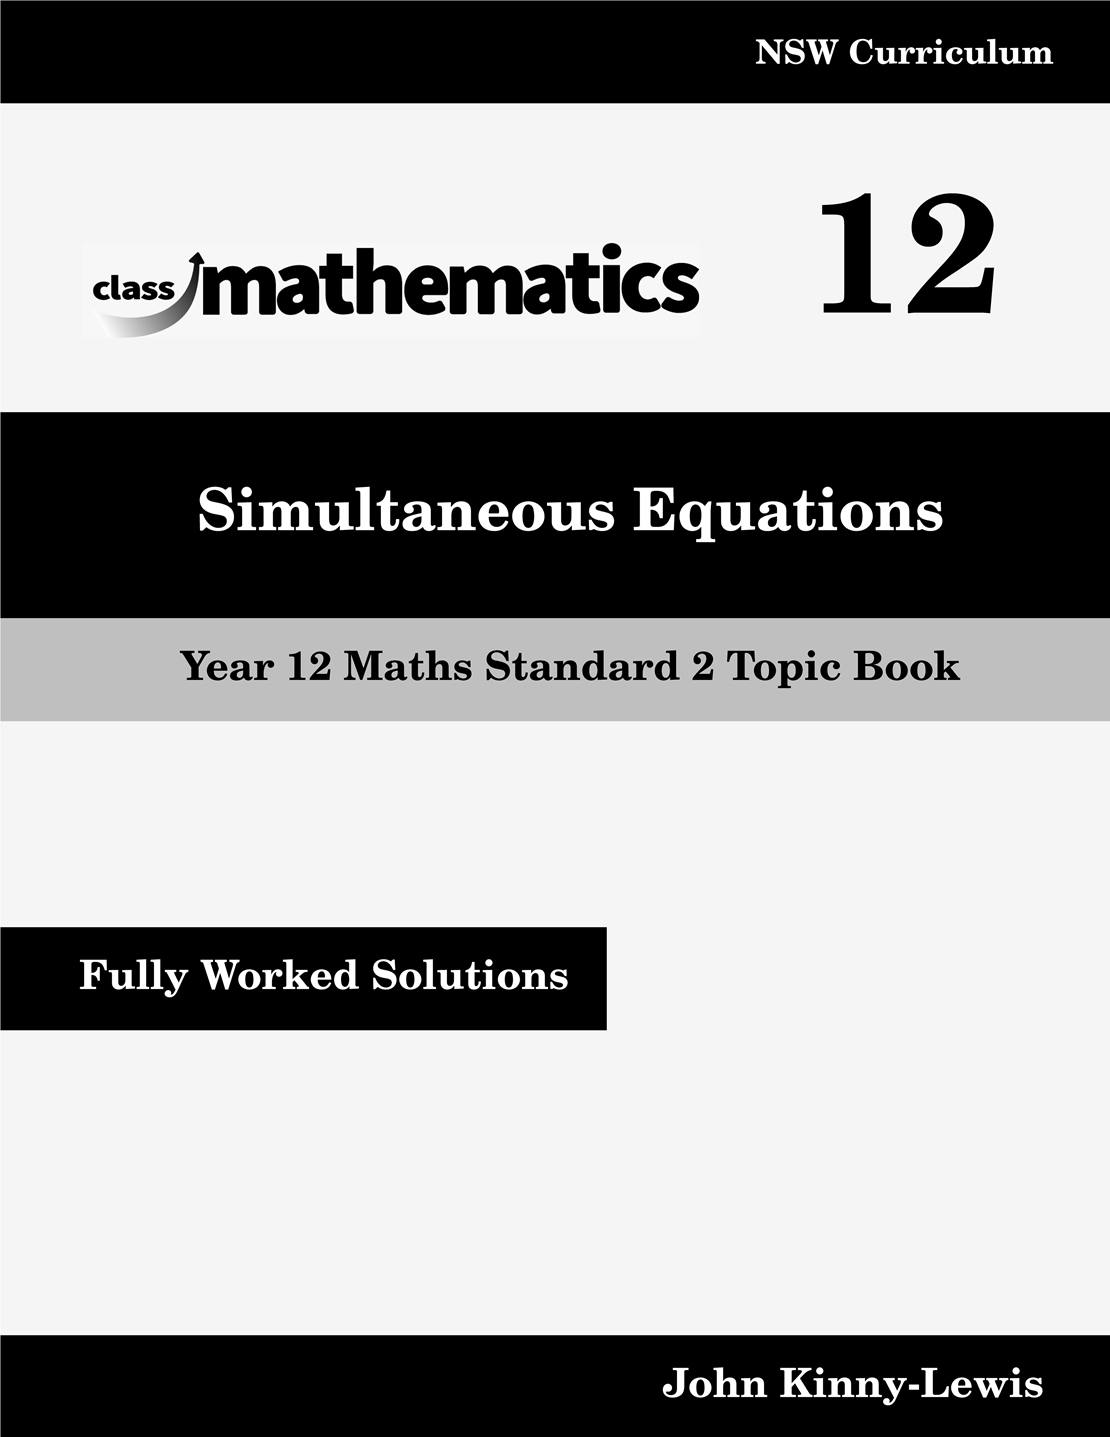 NSW Year 12 Maths Standard 2 - Simultaneous Equations